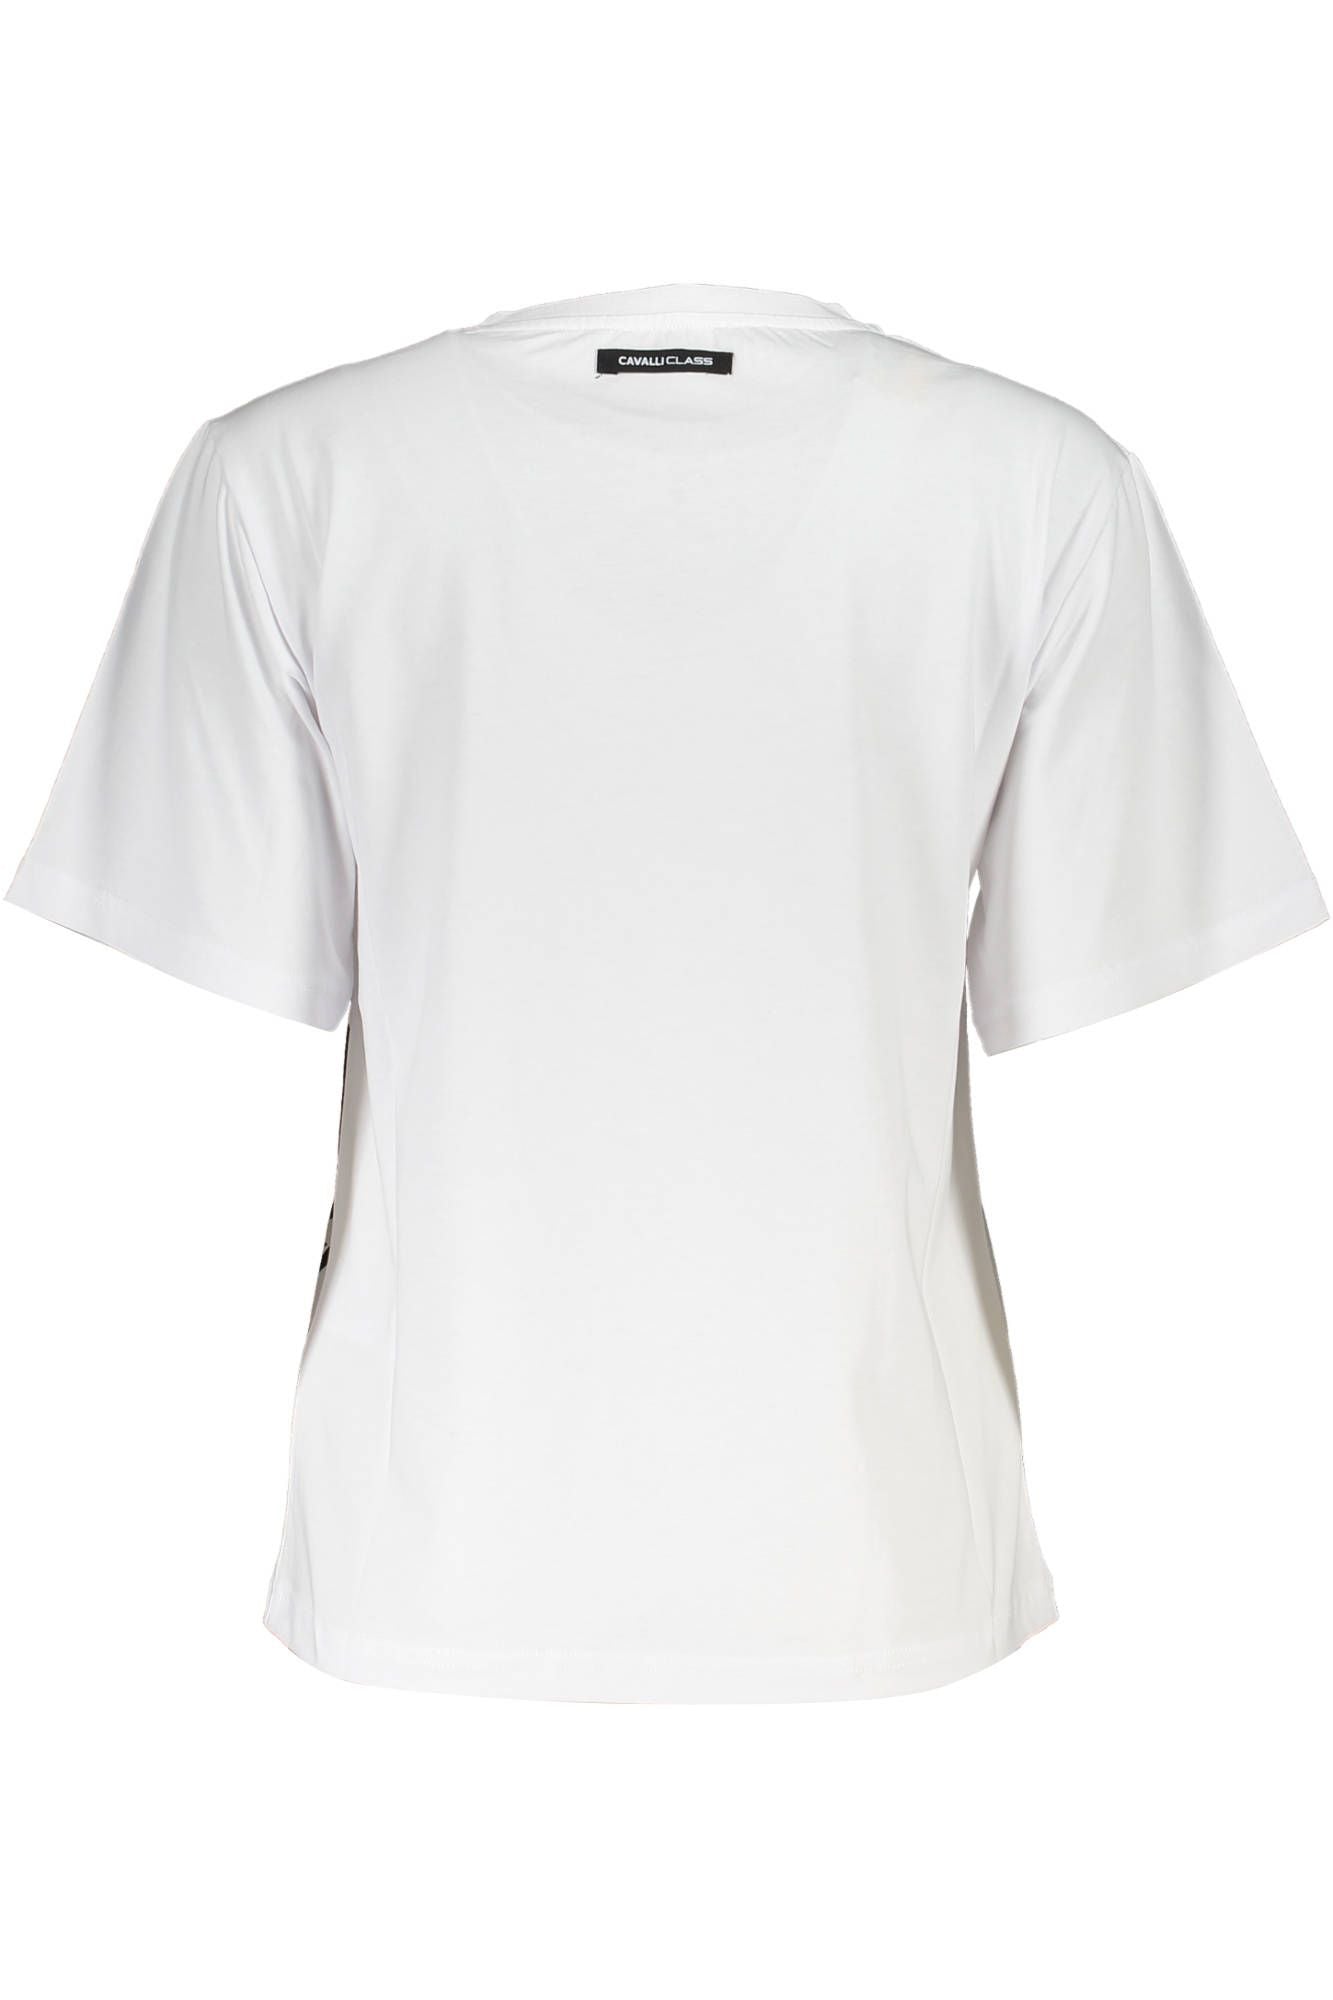 Cavalli Class Chic White Printed Tee with Classic Elegance